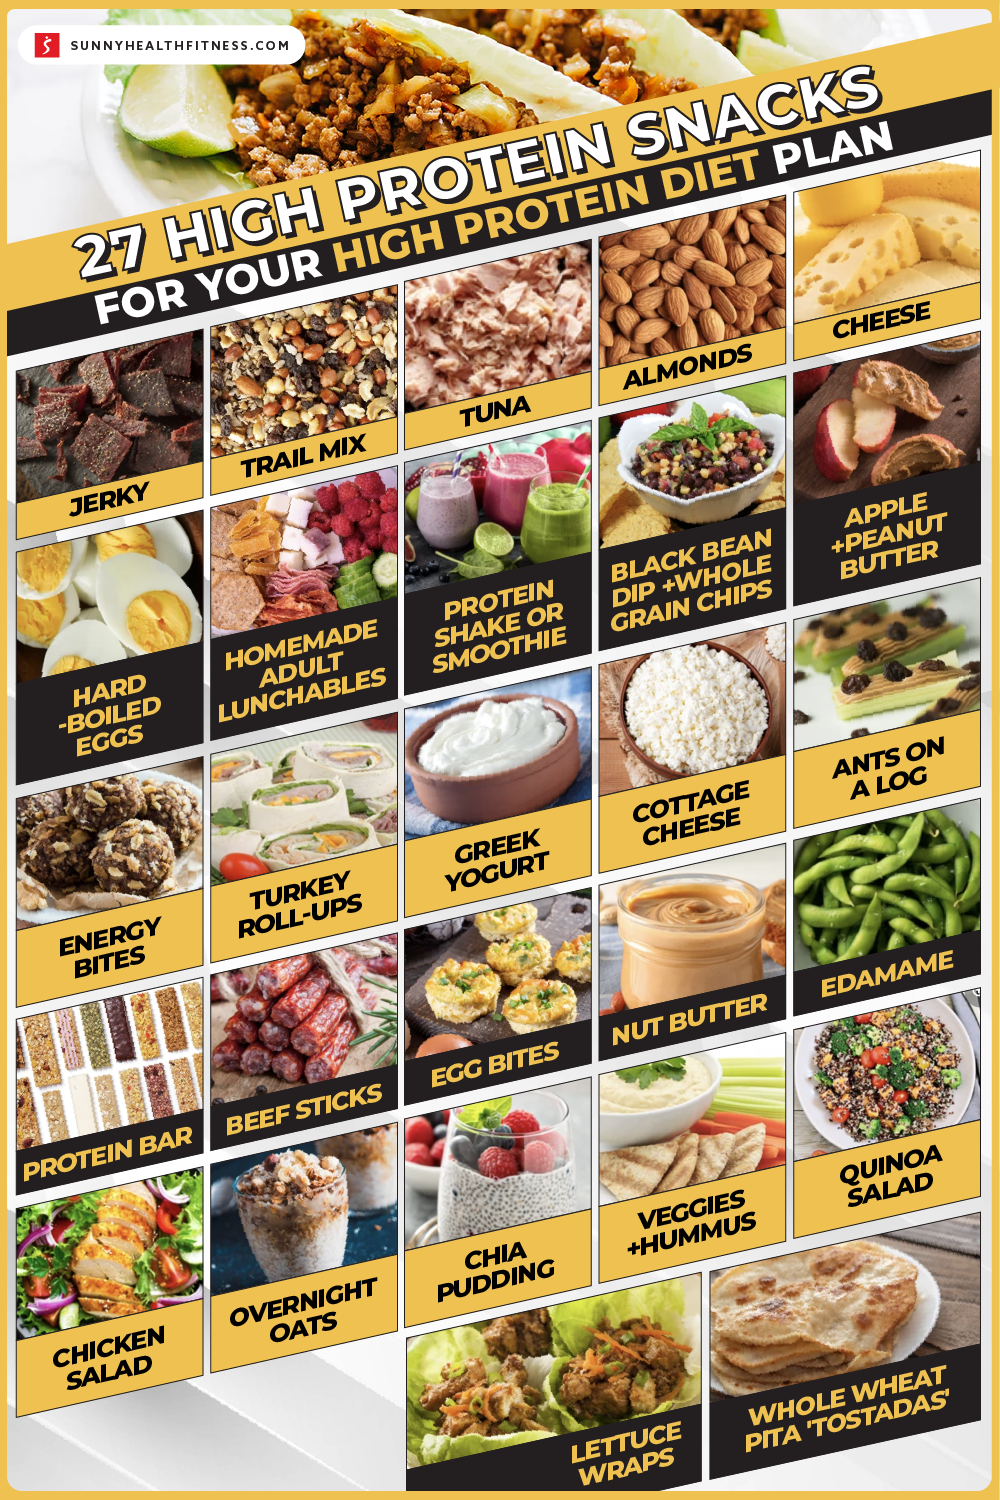 27 High Protein Snacks for Your High Protein Diet Plan